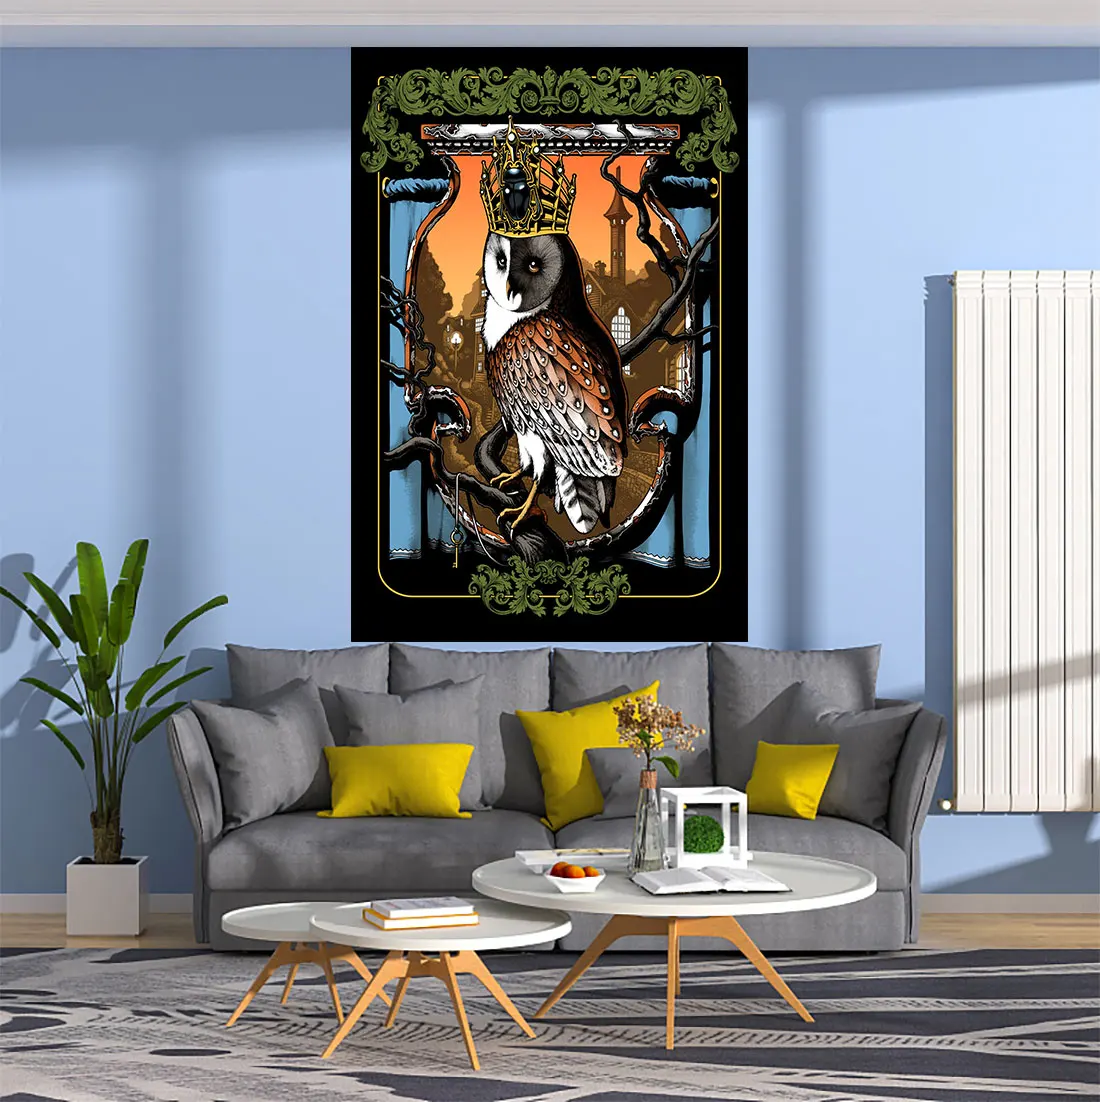 

Owls And Bats Aesthetic Hanging Tapestries Art Picture Backgroud Wall Cloth Living Room Or Bedroom Decor